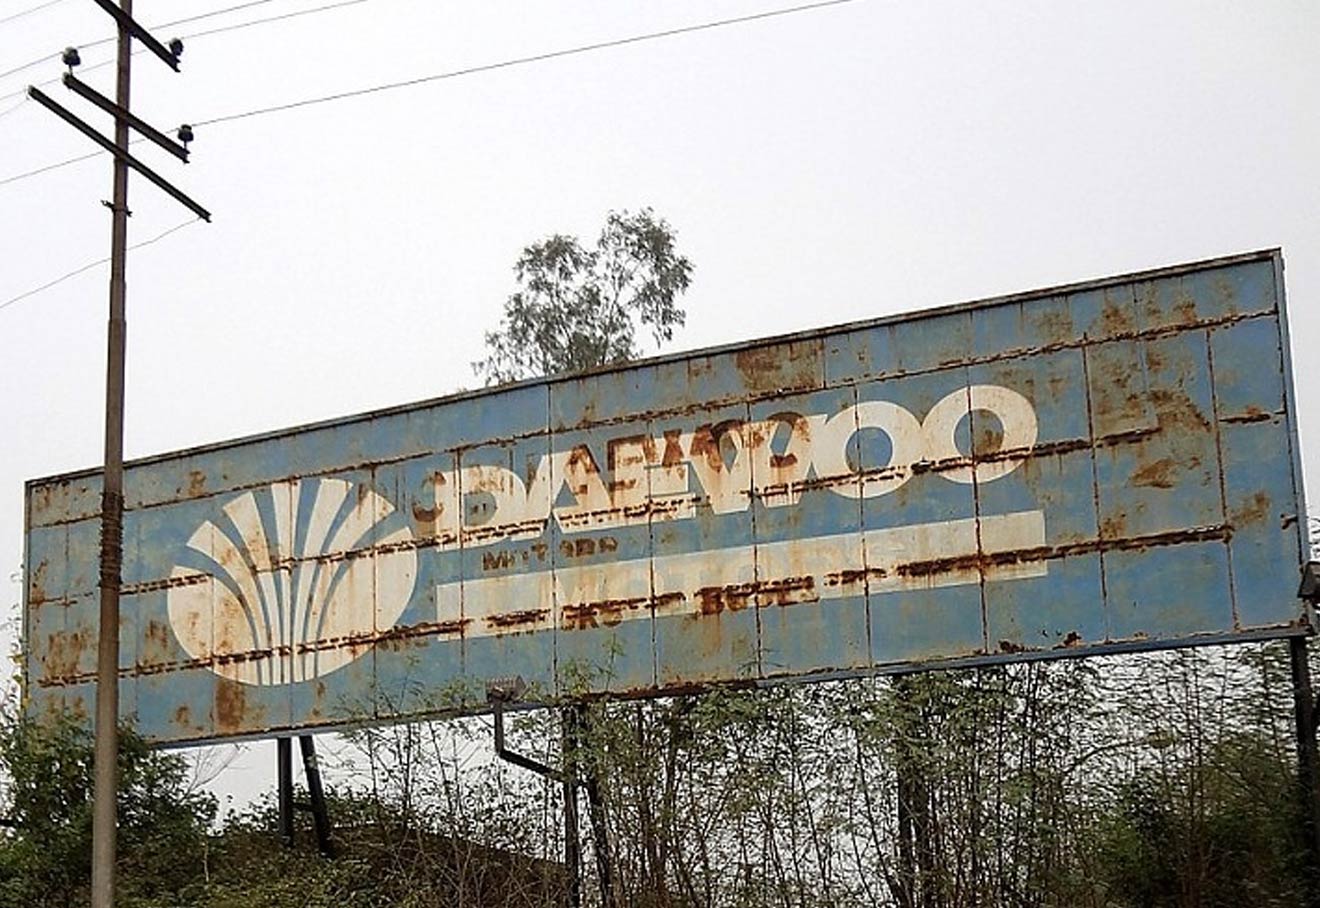 Daewoo Motor Land To Be Developed As Industrial Park for 600 MSMEs In Greater Noida